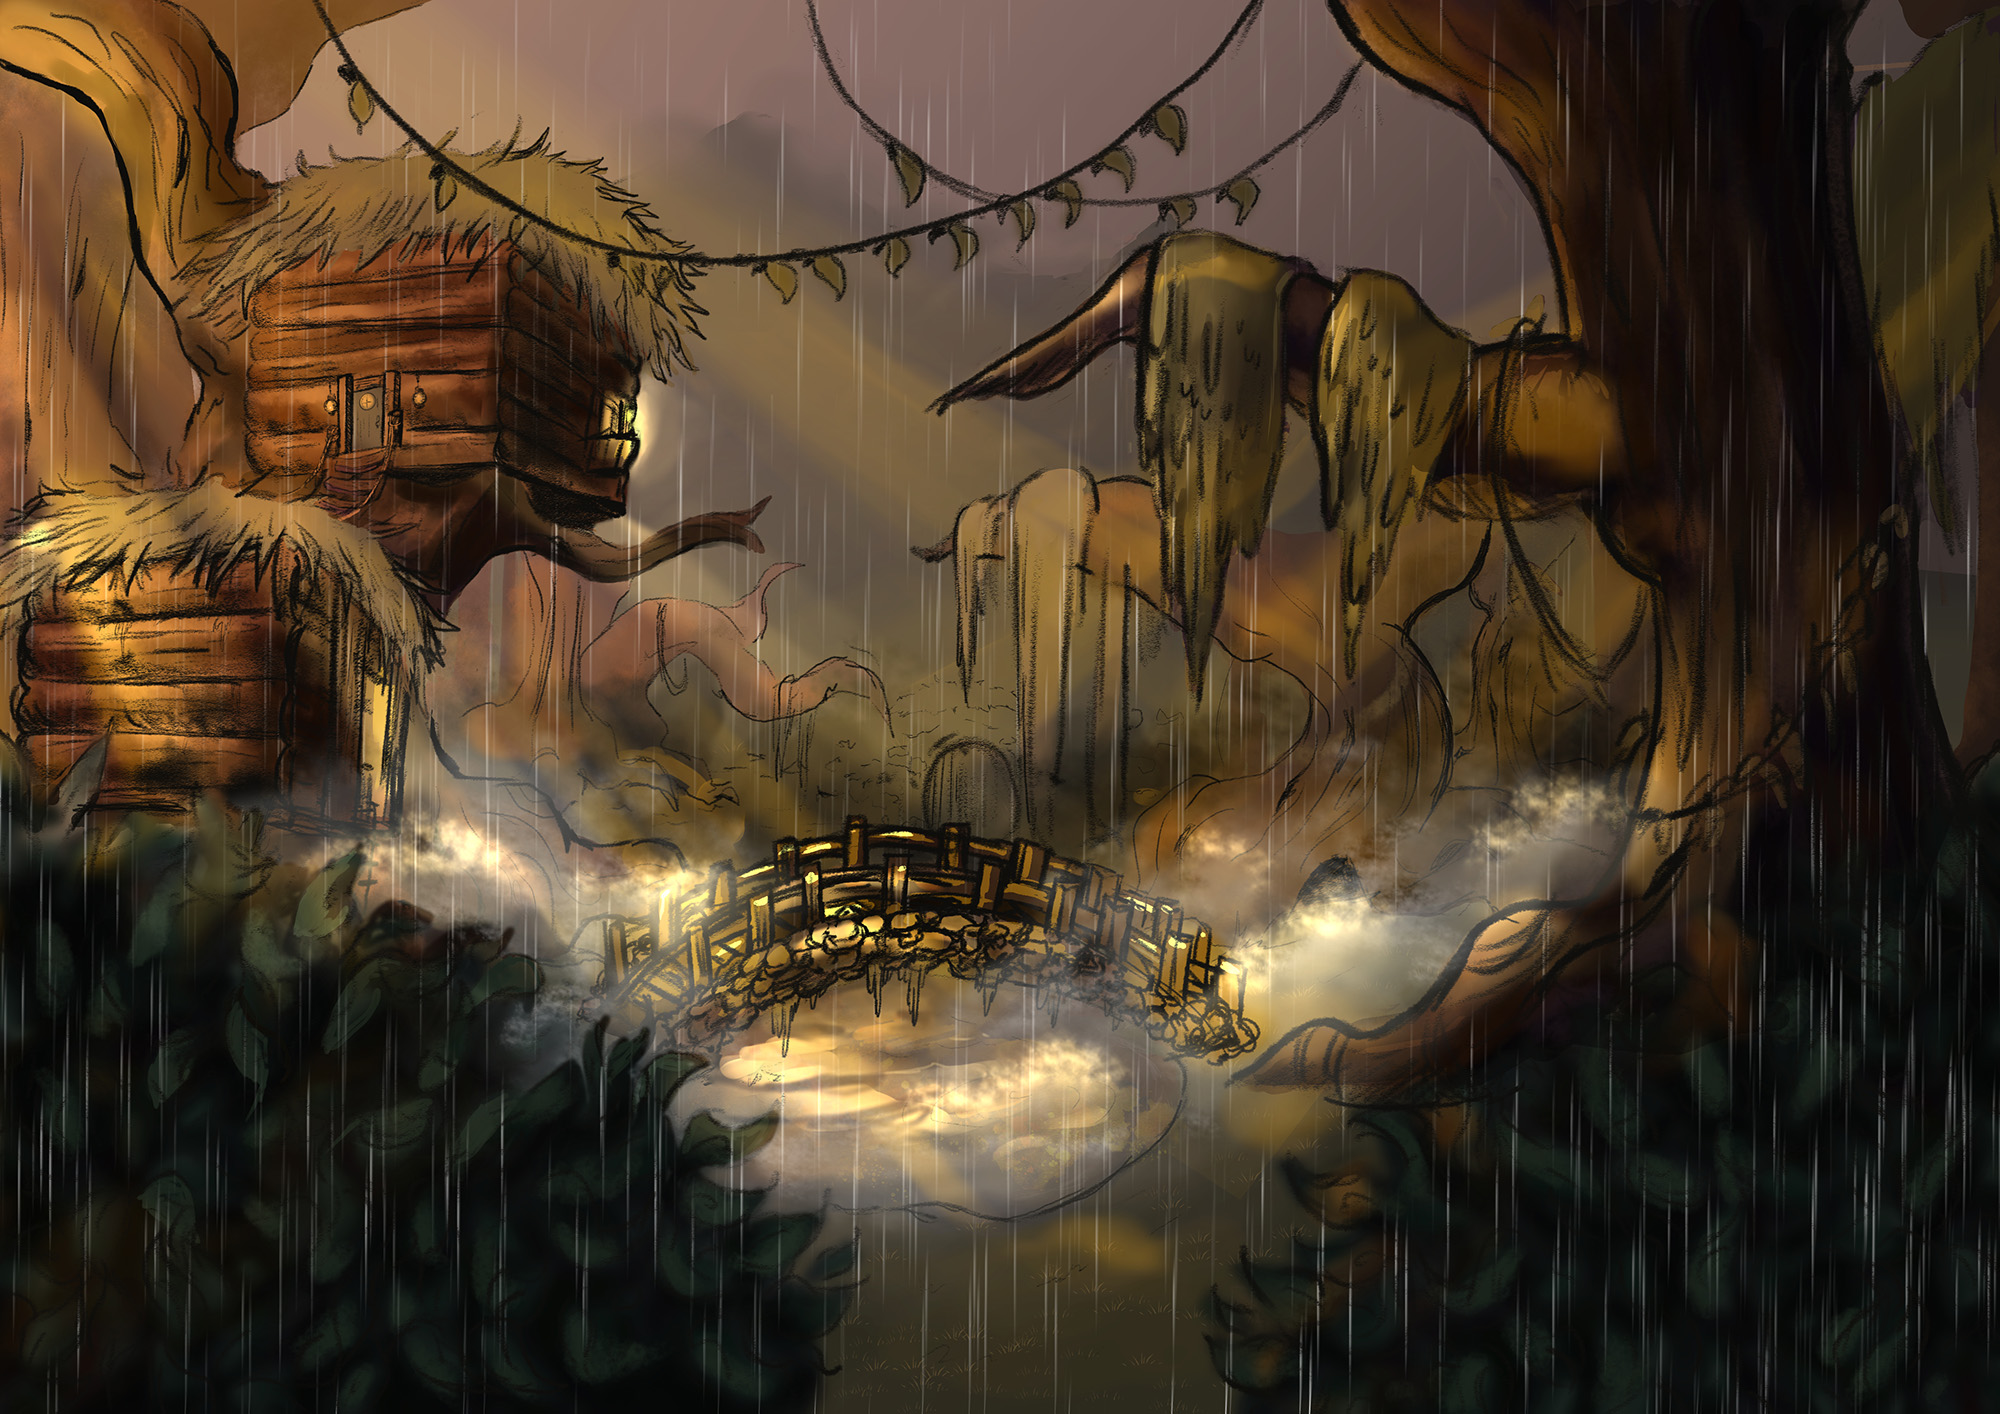 Still of a swamp environment / Still of a swamp environment, created using Clip Studio Paint